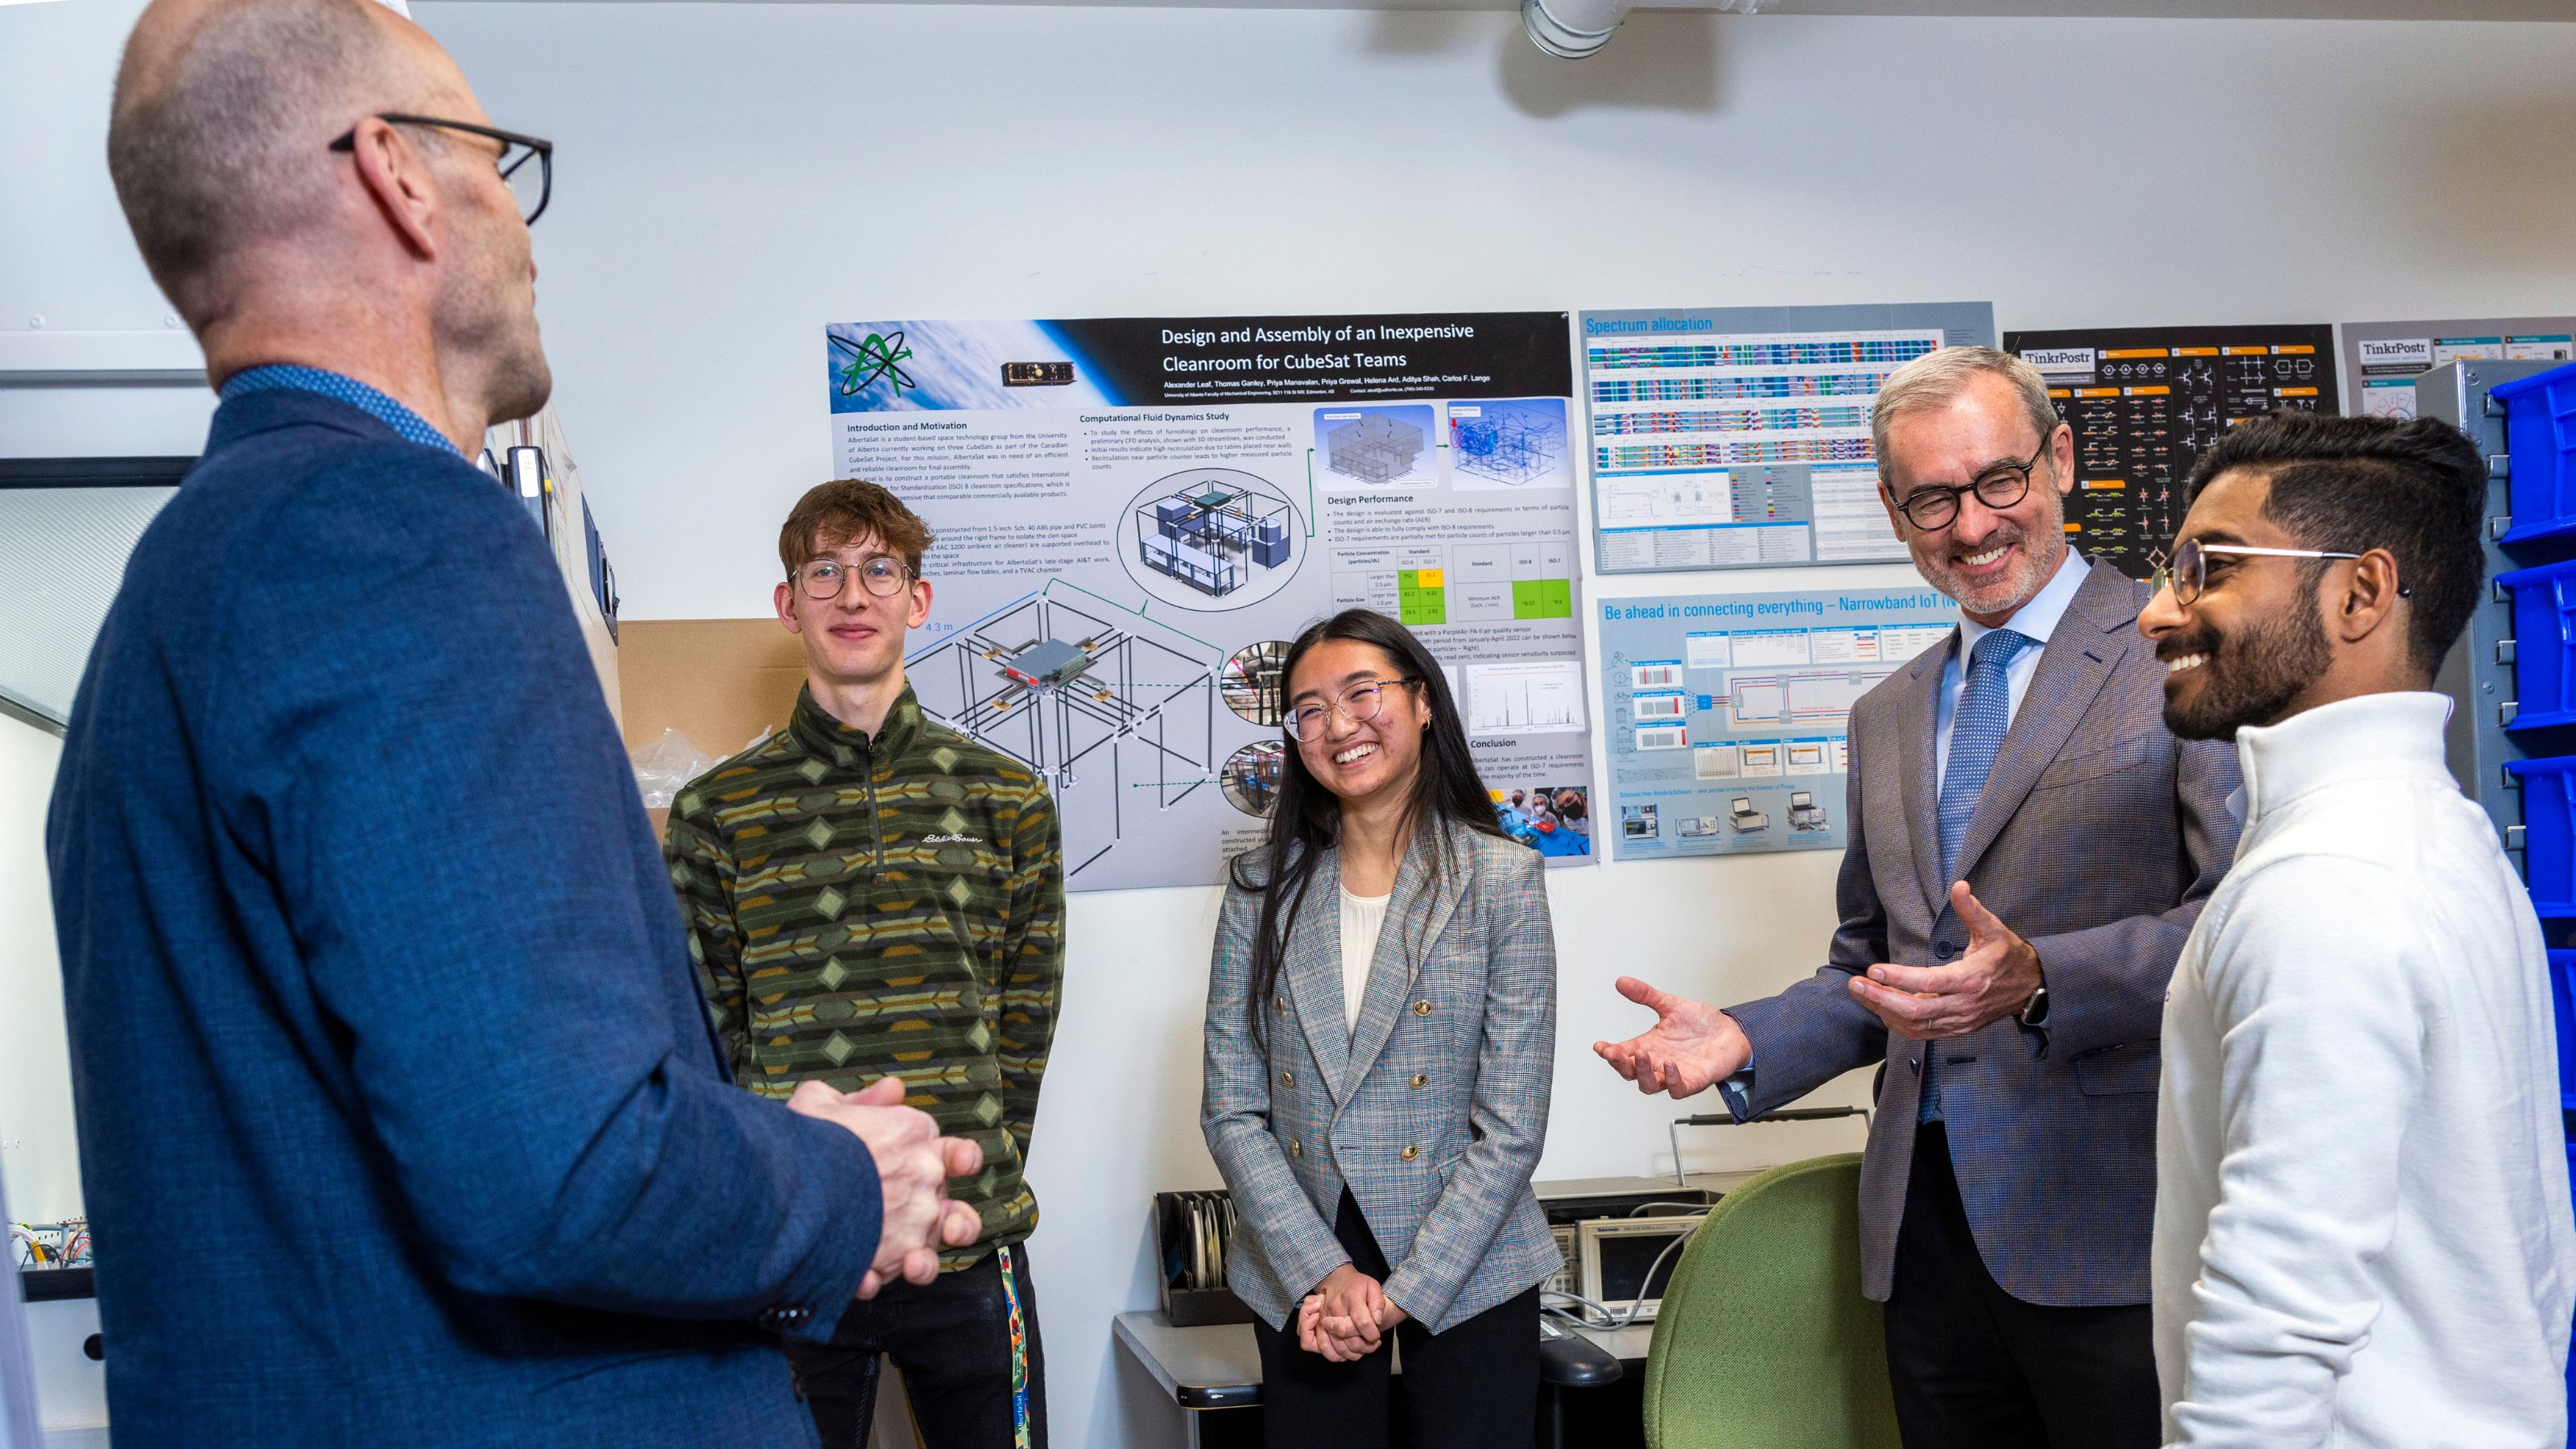 University of Alberta President William Flanagan views 3 satellites that have been built for the Canadian Space Agency's Canadian Cubesat Program, on November 21, 2022. The program involves 15 institutions across Canada — all led by student teams.